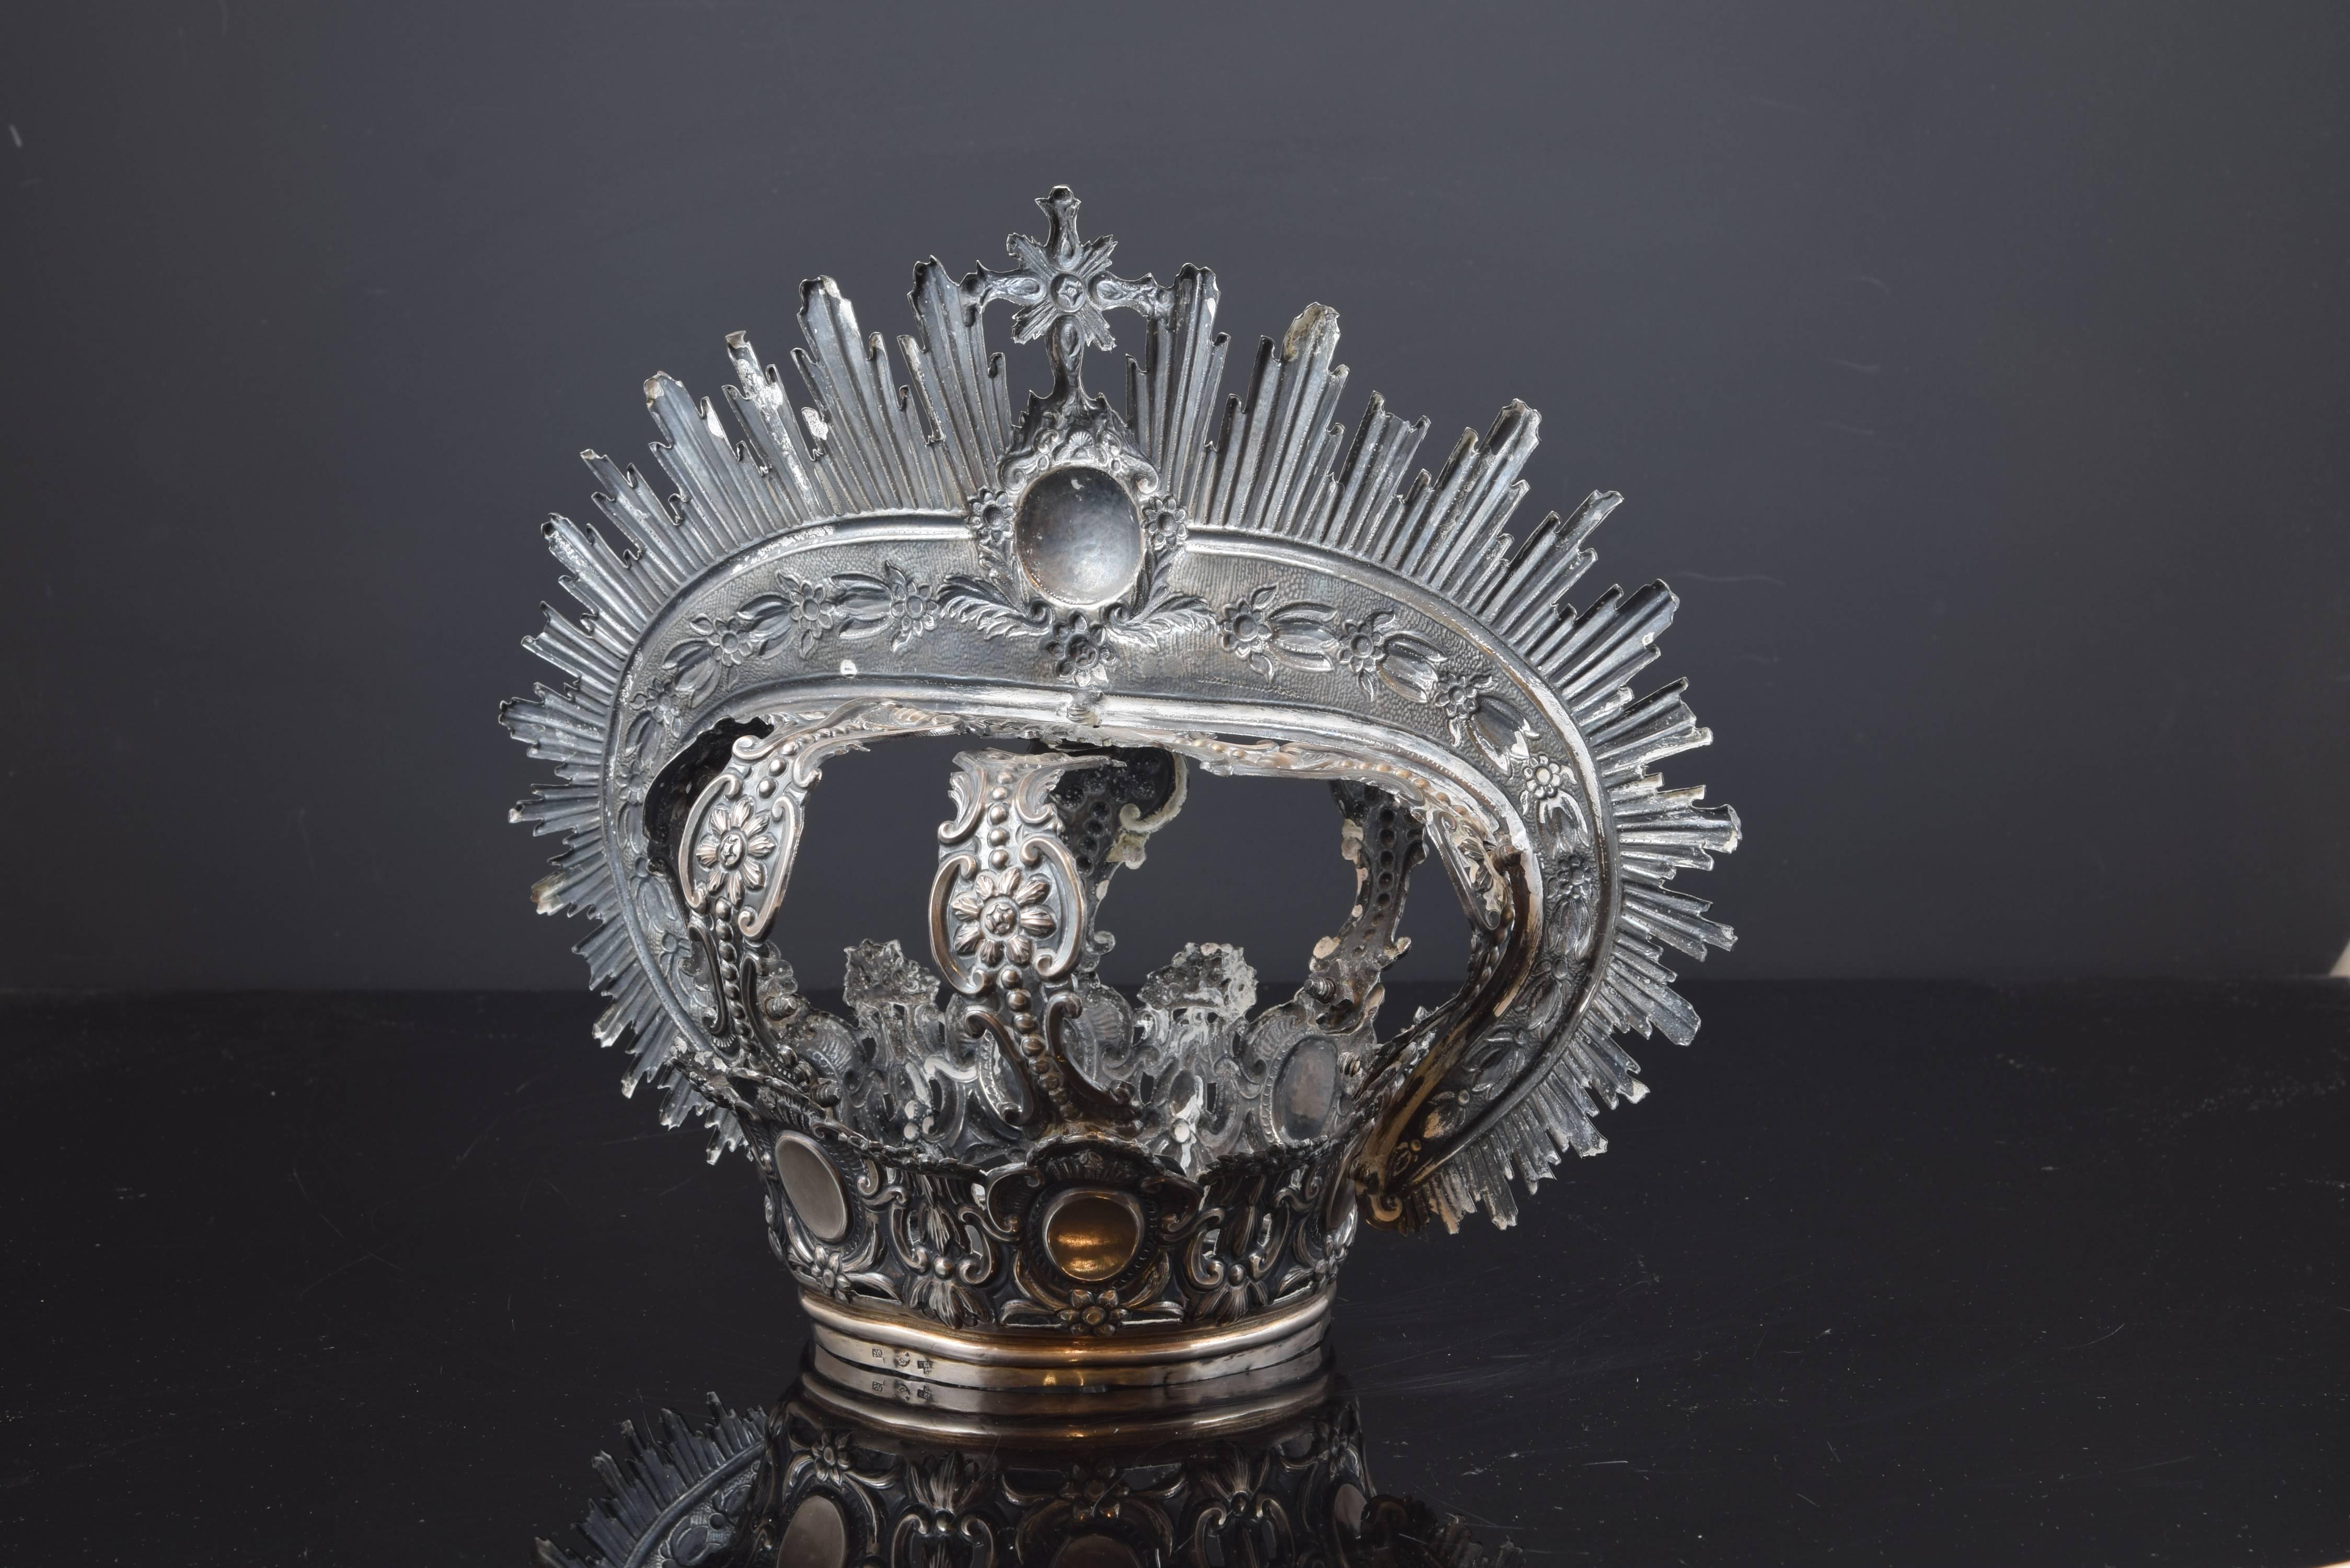 Early 19th Century Crown, Silver with Hallmarks, Cordoba, Spain, 1827